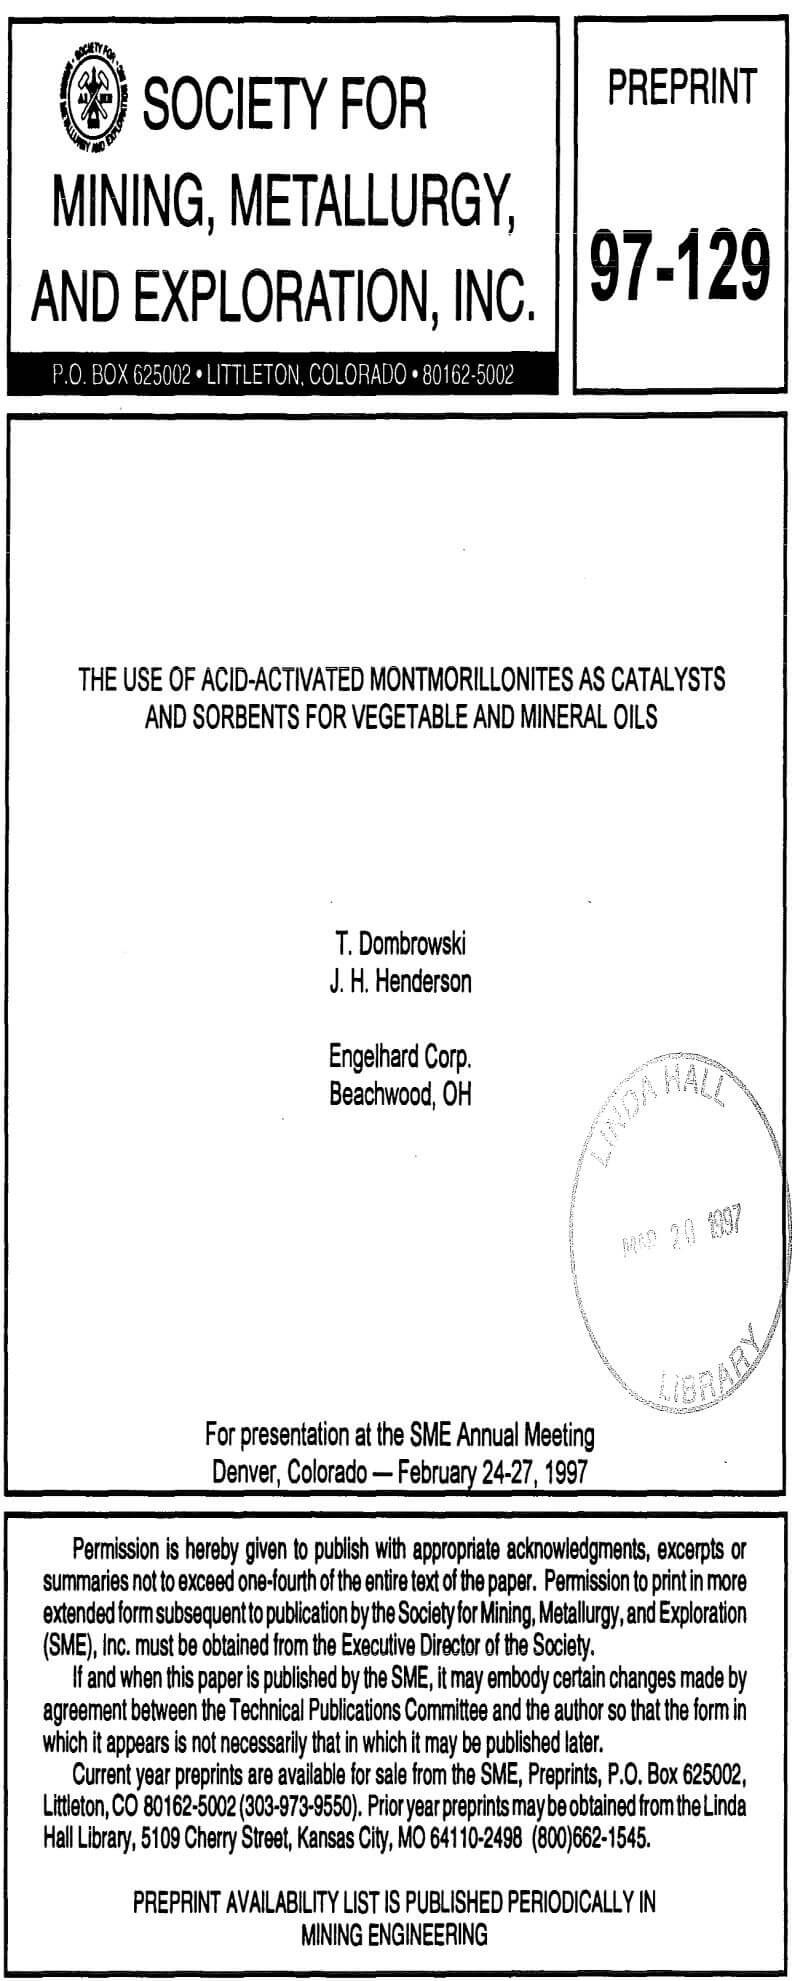 the use of acid-activated montmorillonites as catalysts and sorbents for vegetable and mineral oils